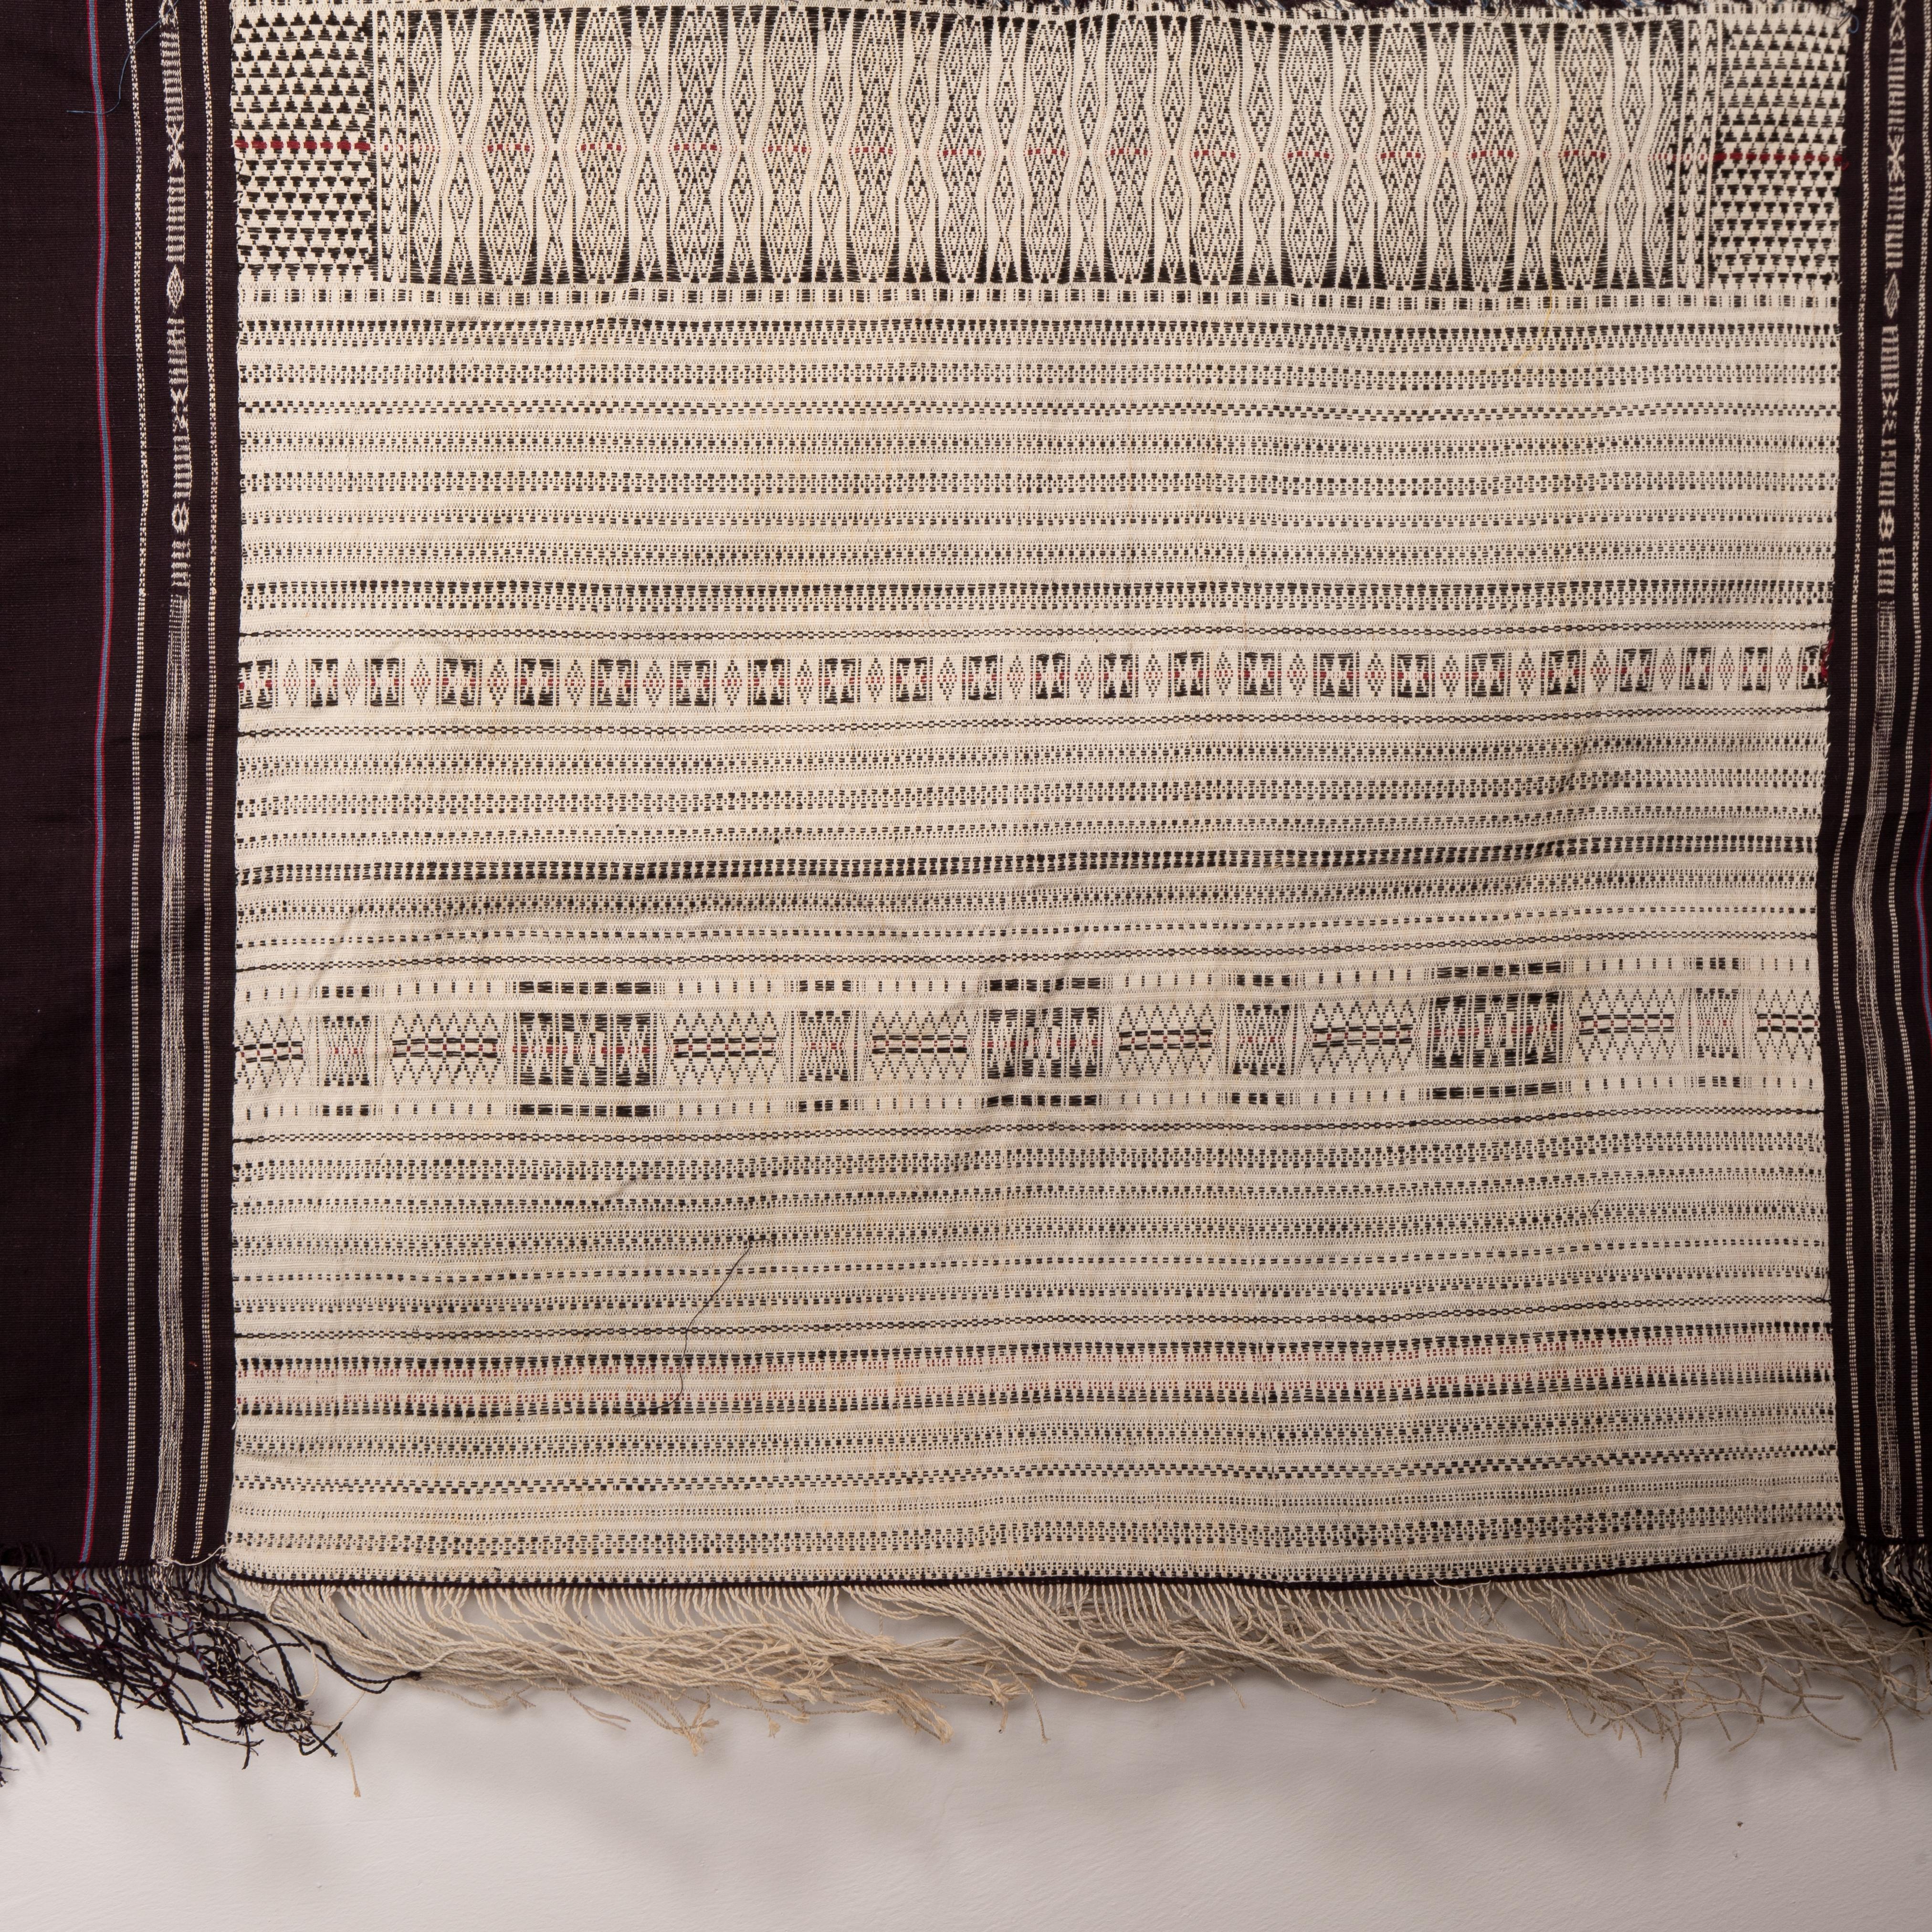 Hand-Woven Ceremonial Batak Textile 'Ragidup', Sumatra, Indonesia Early 20th Century For Sale